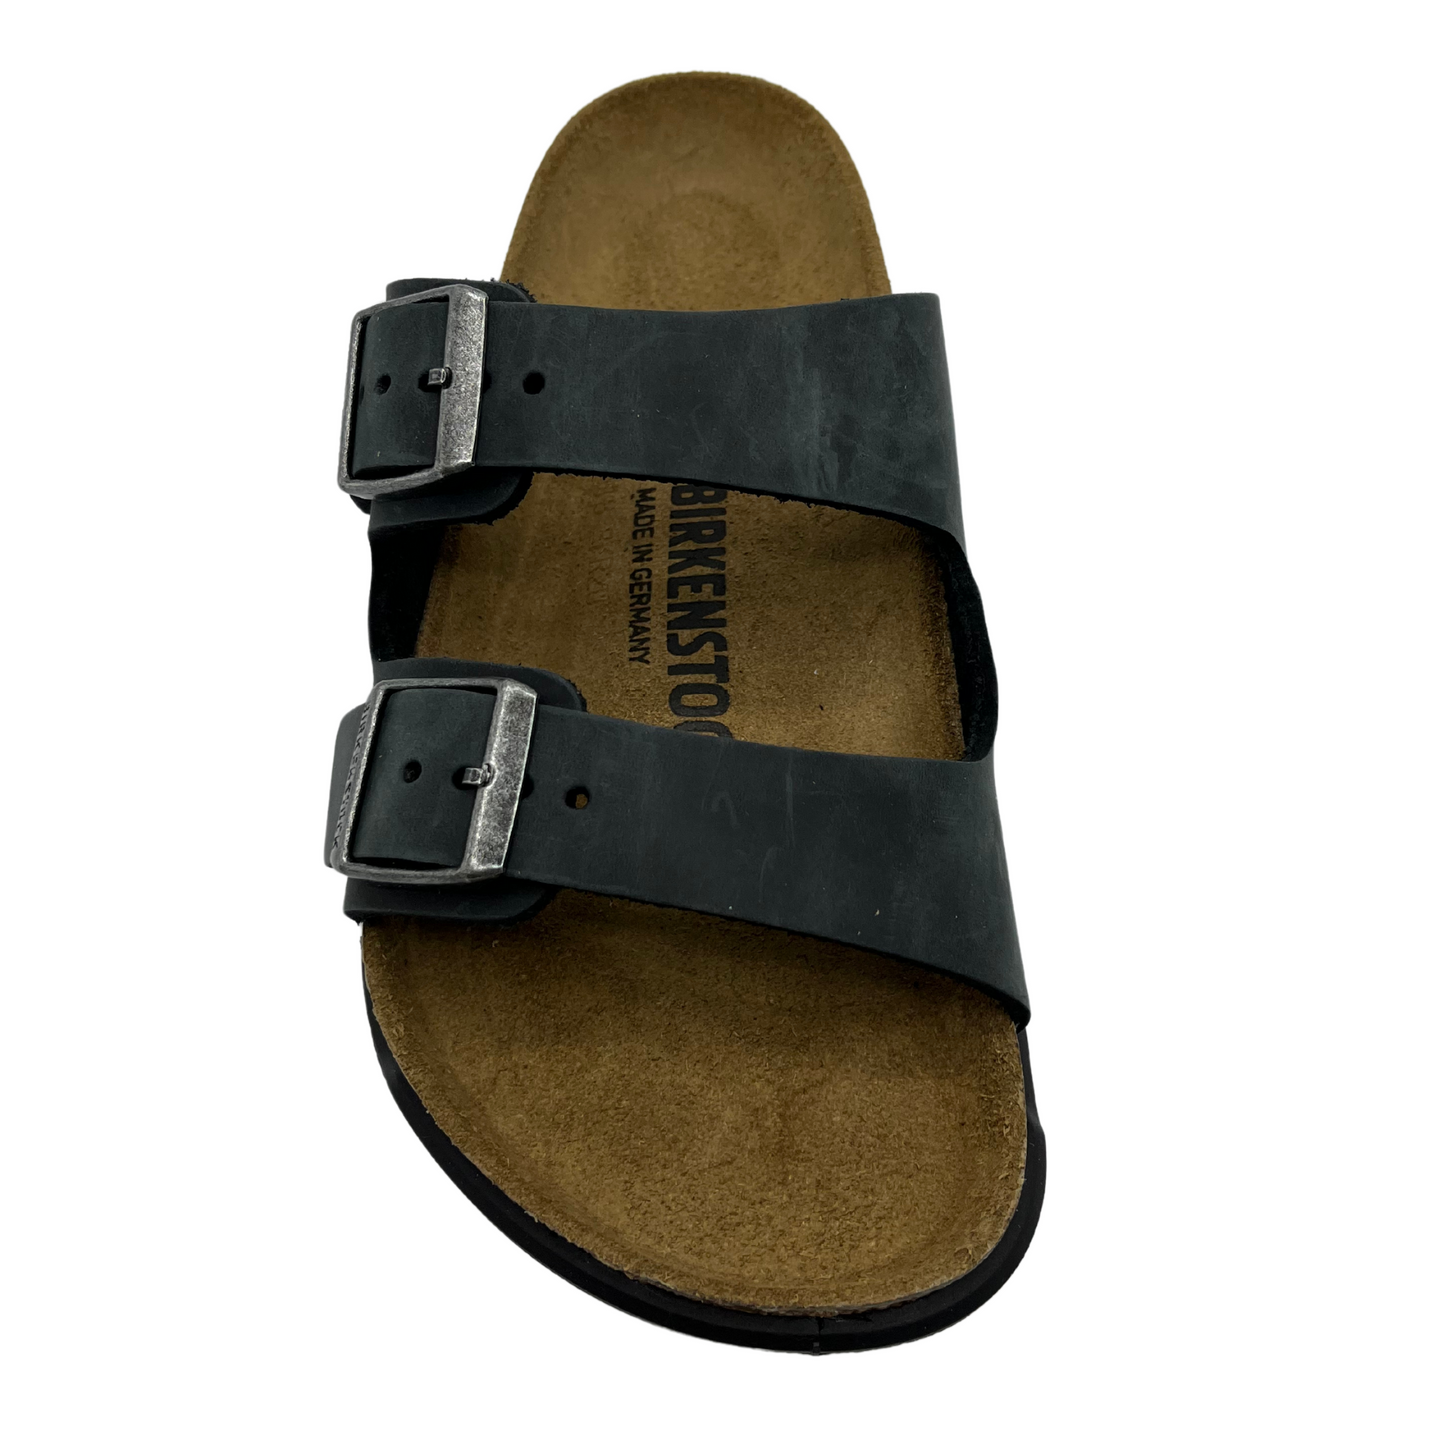 Top view of leather strapped sandals with contoured cork footbed